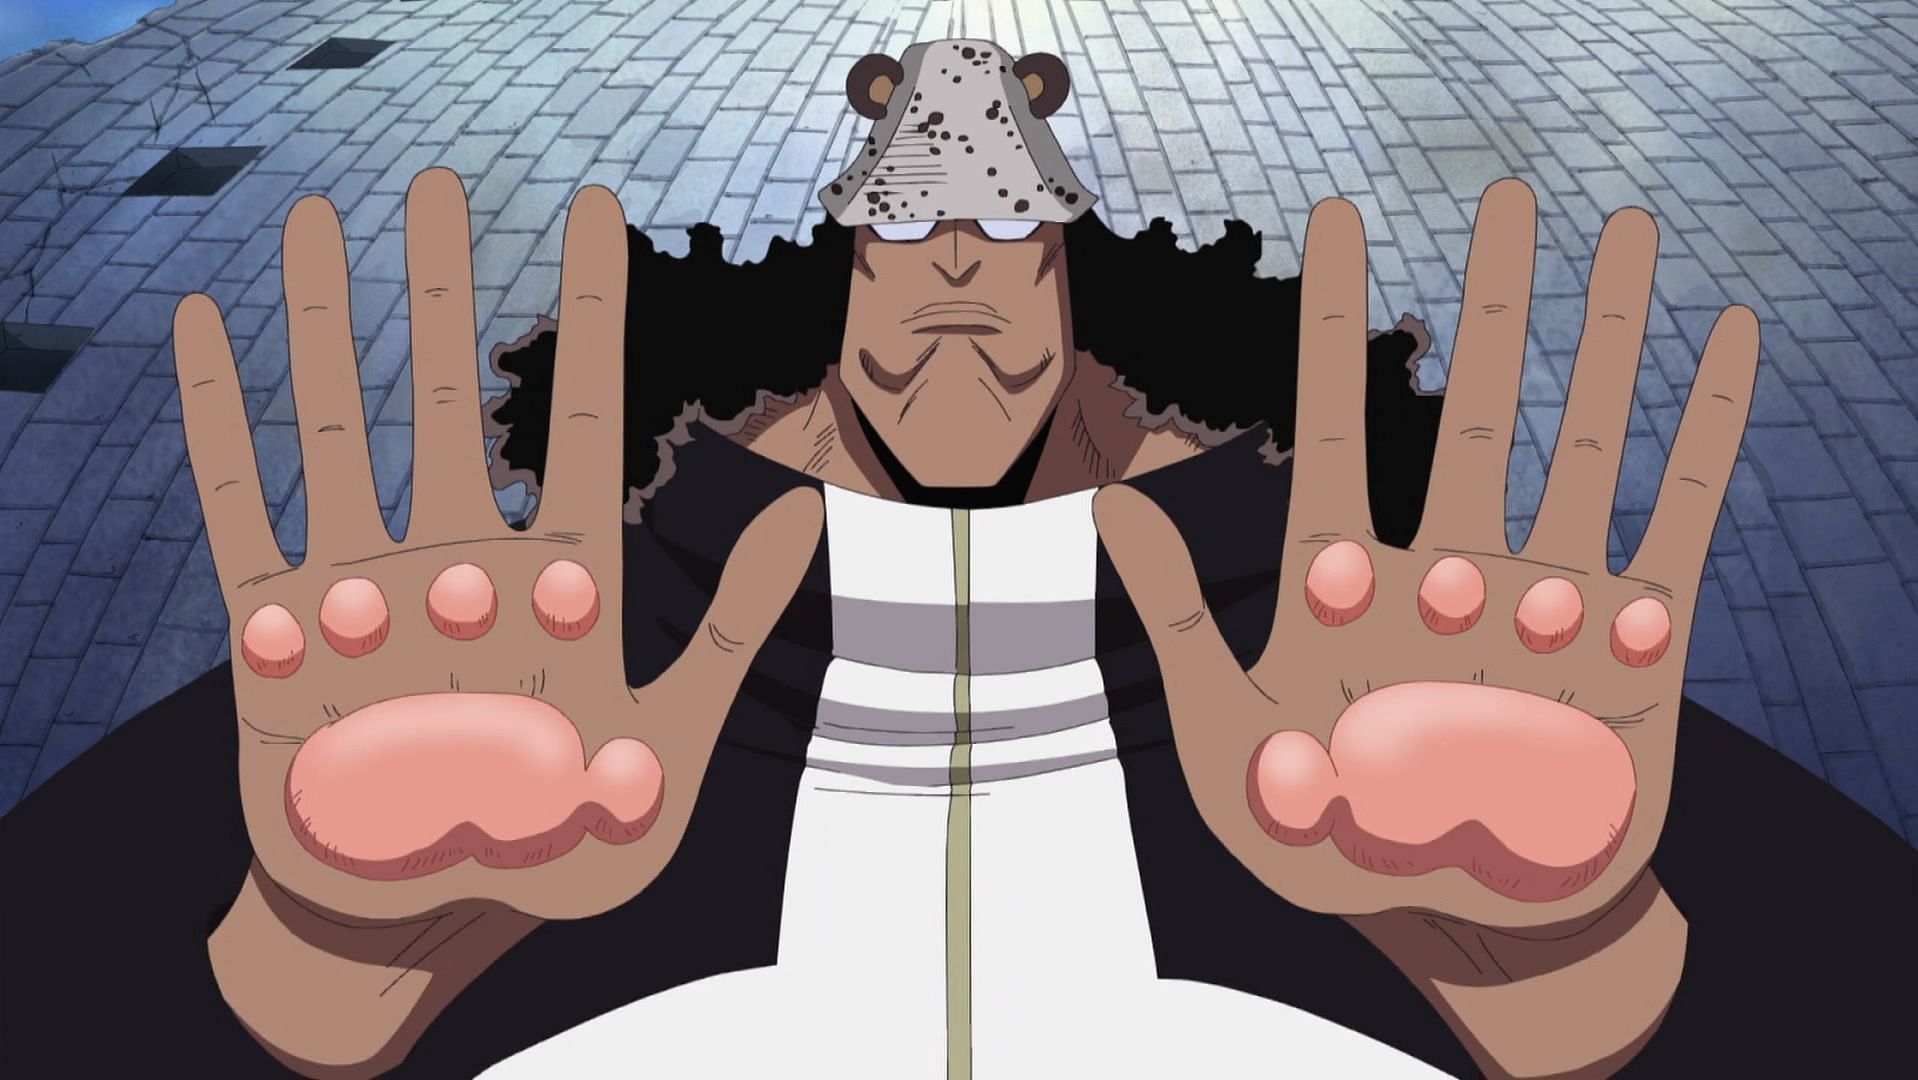 One Piece Chapter 1071: Why Kuma may have returned to Mariejois after just escaping (Image via Toei Animation)